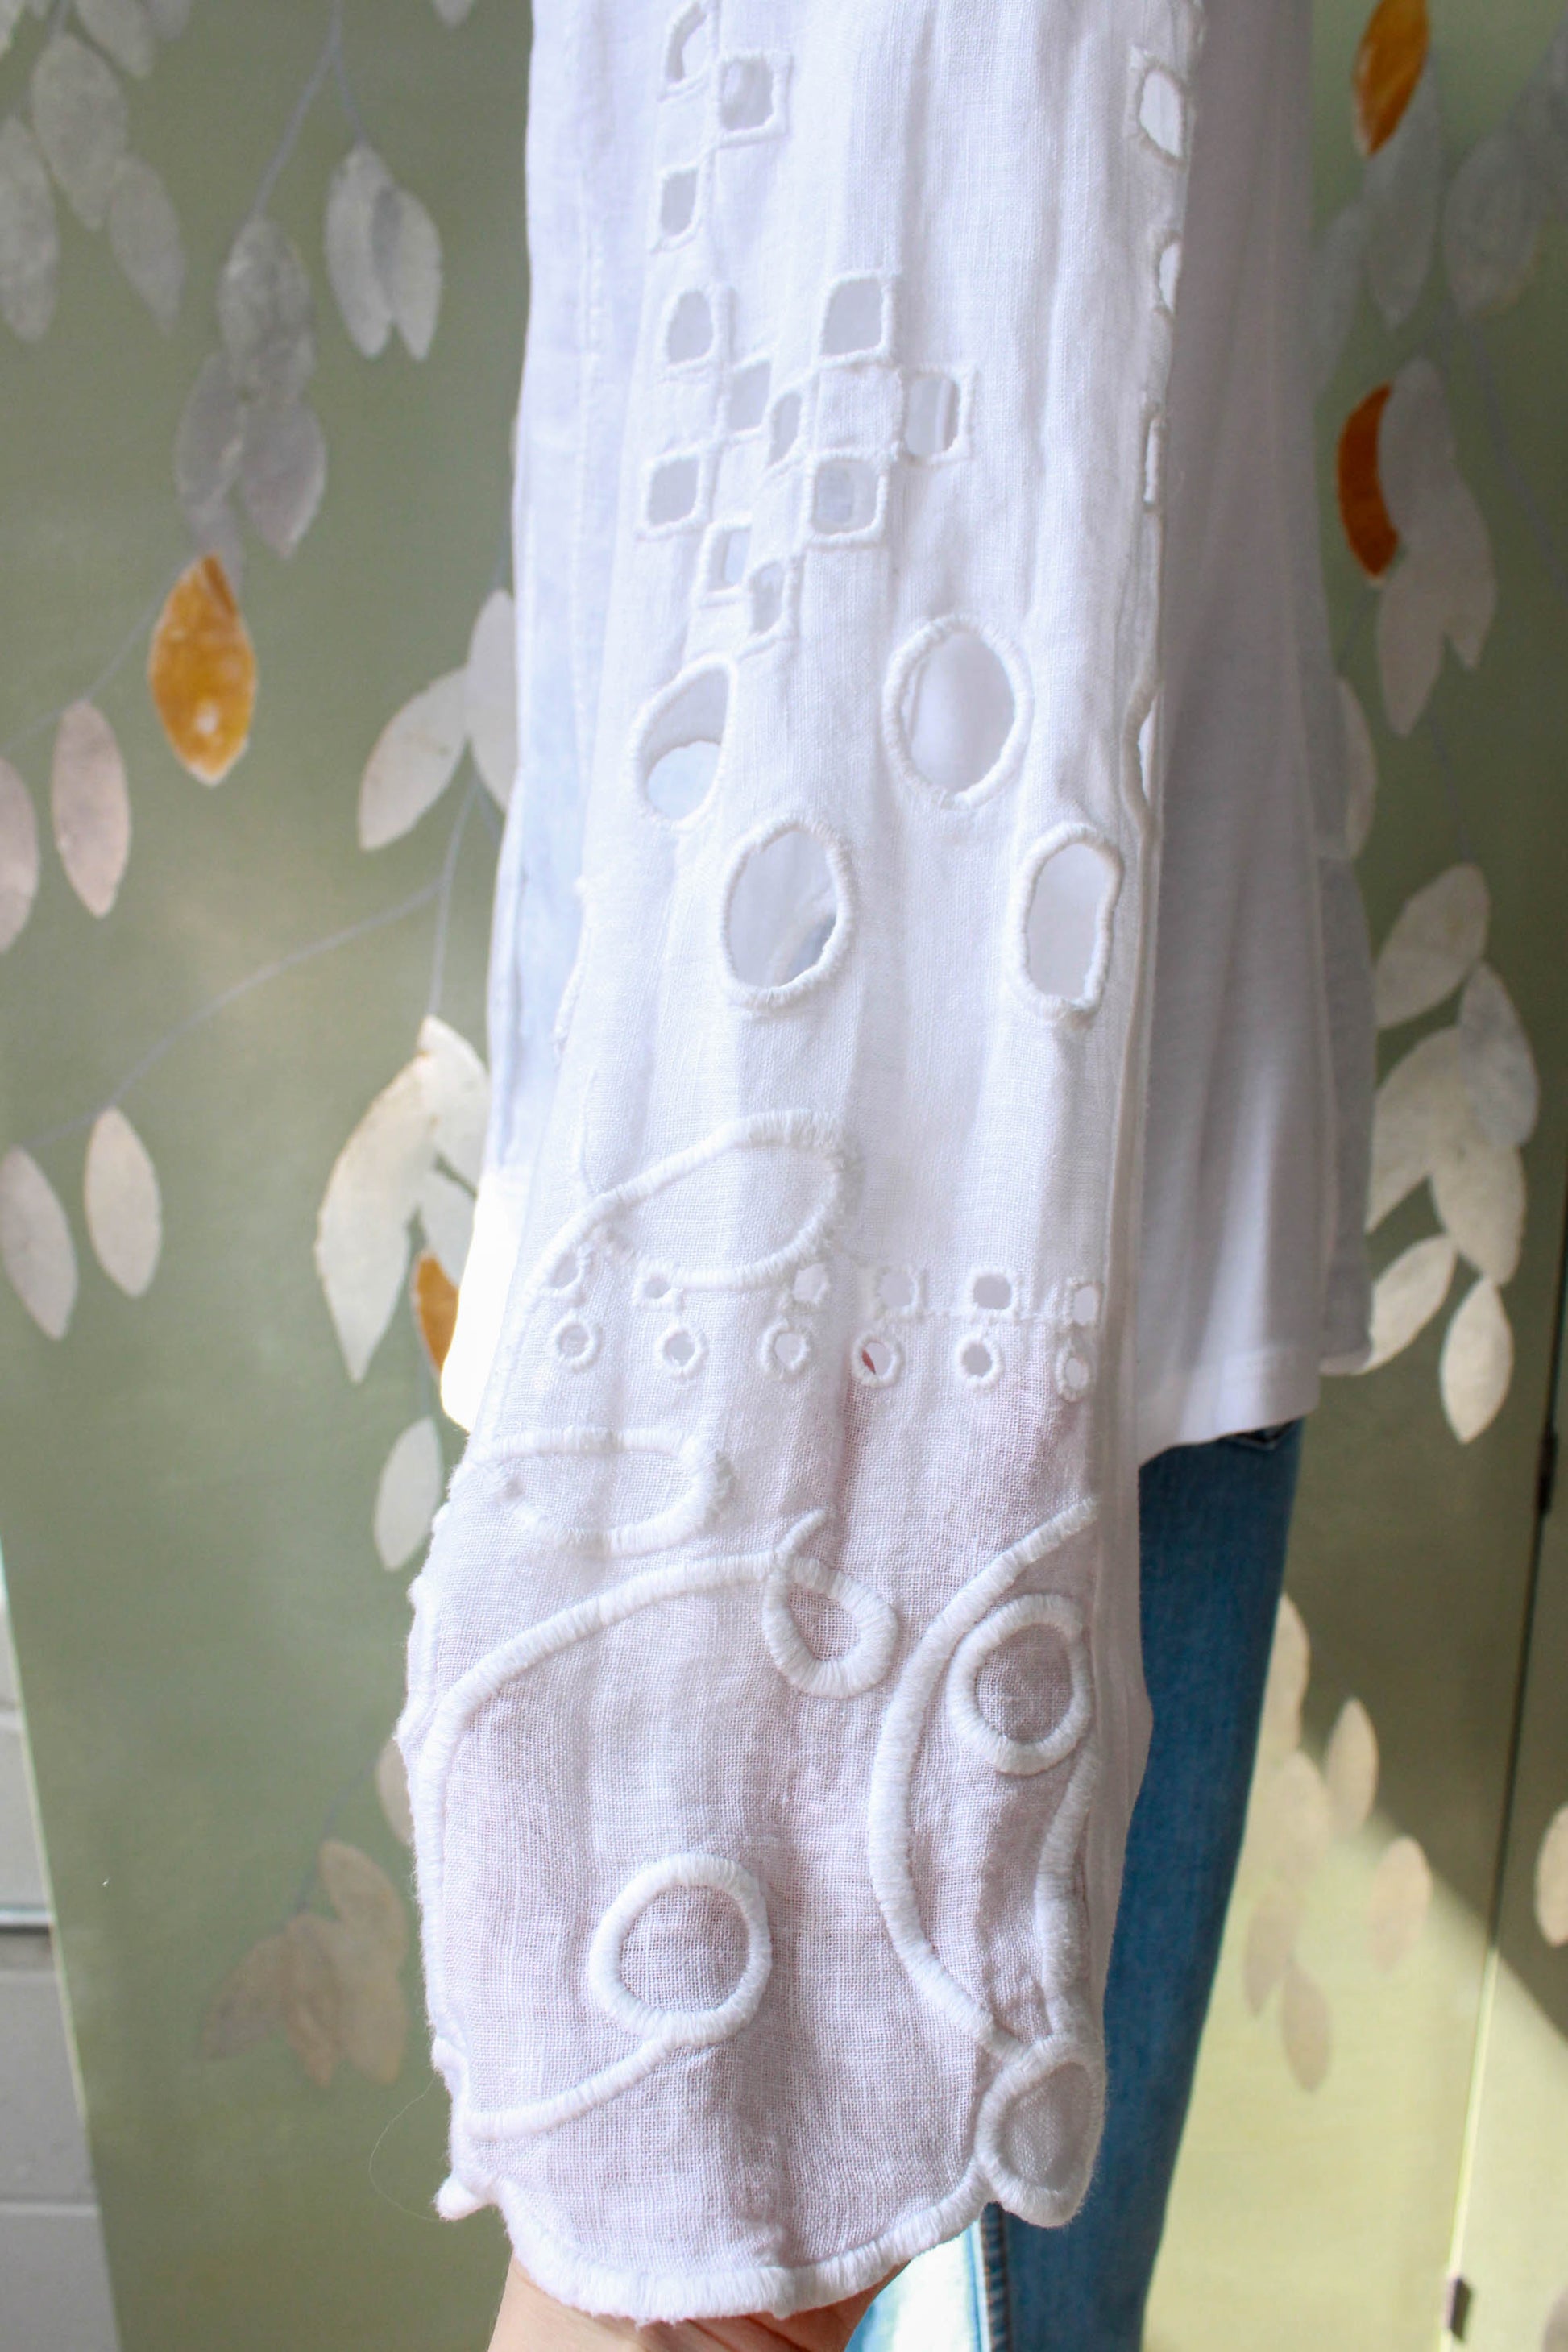 elisa cavaletti white linen button up blouse with eyelet embroidered flared sleeves, silver buttons